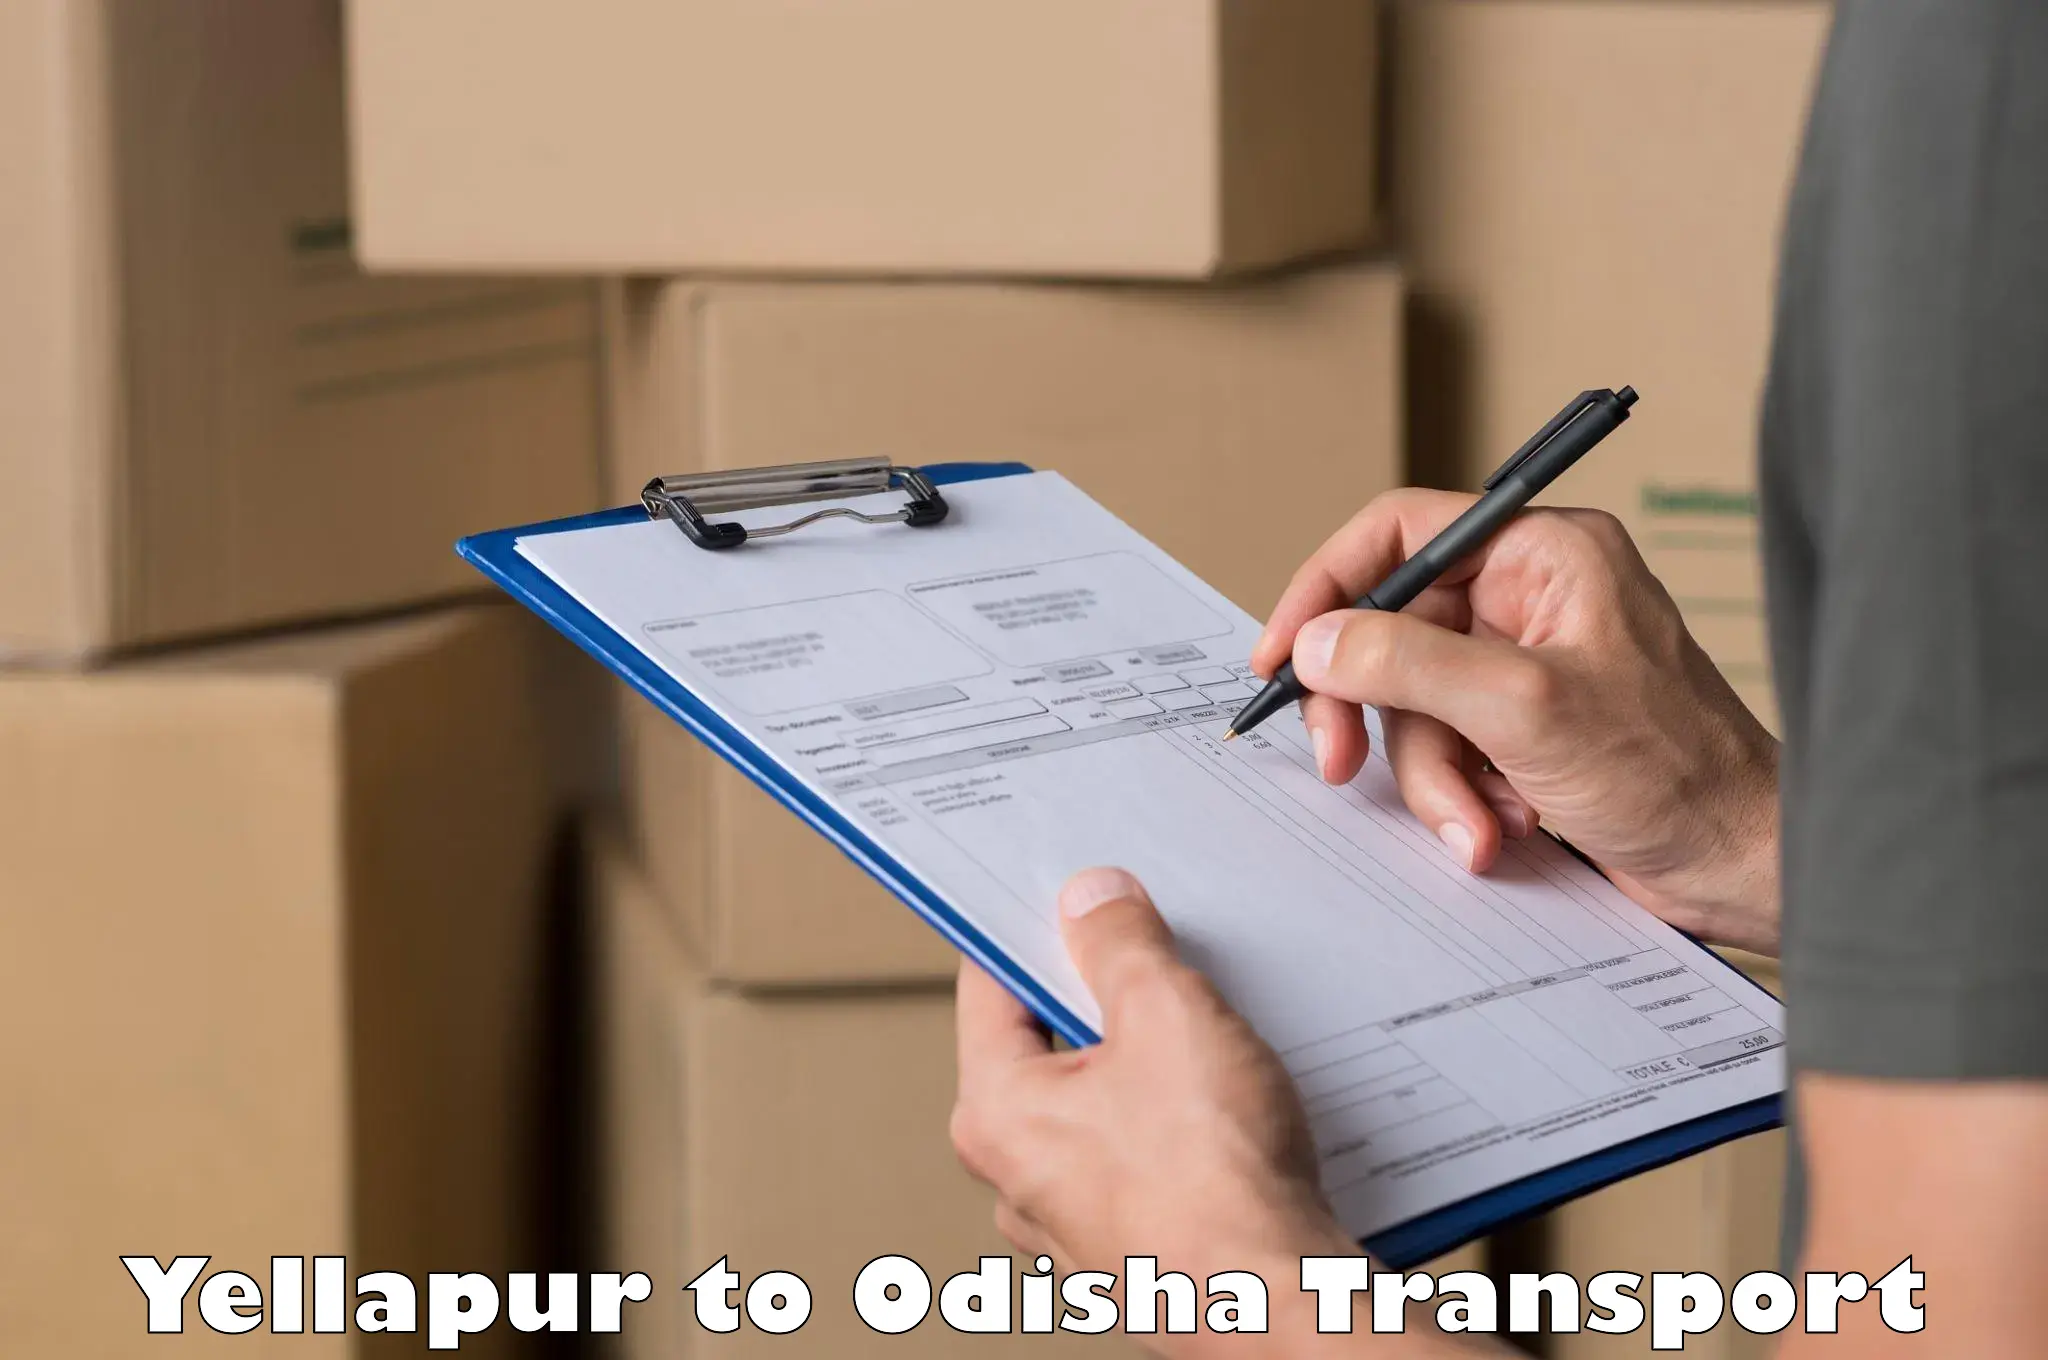 Online transport booking Yellapur to Cuttack